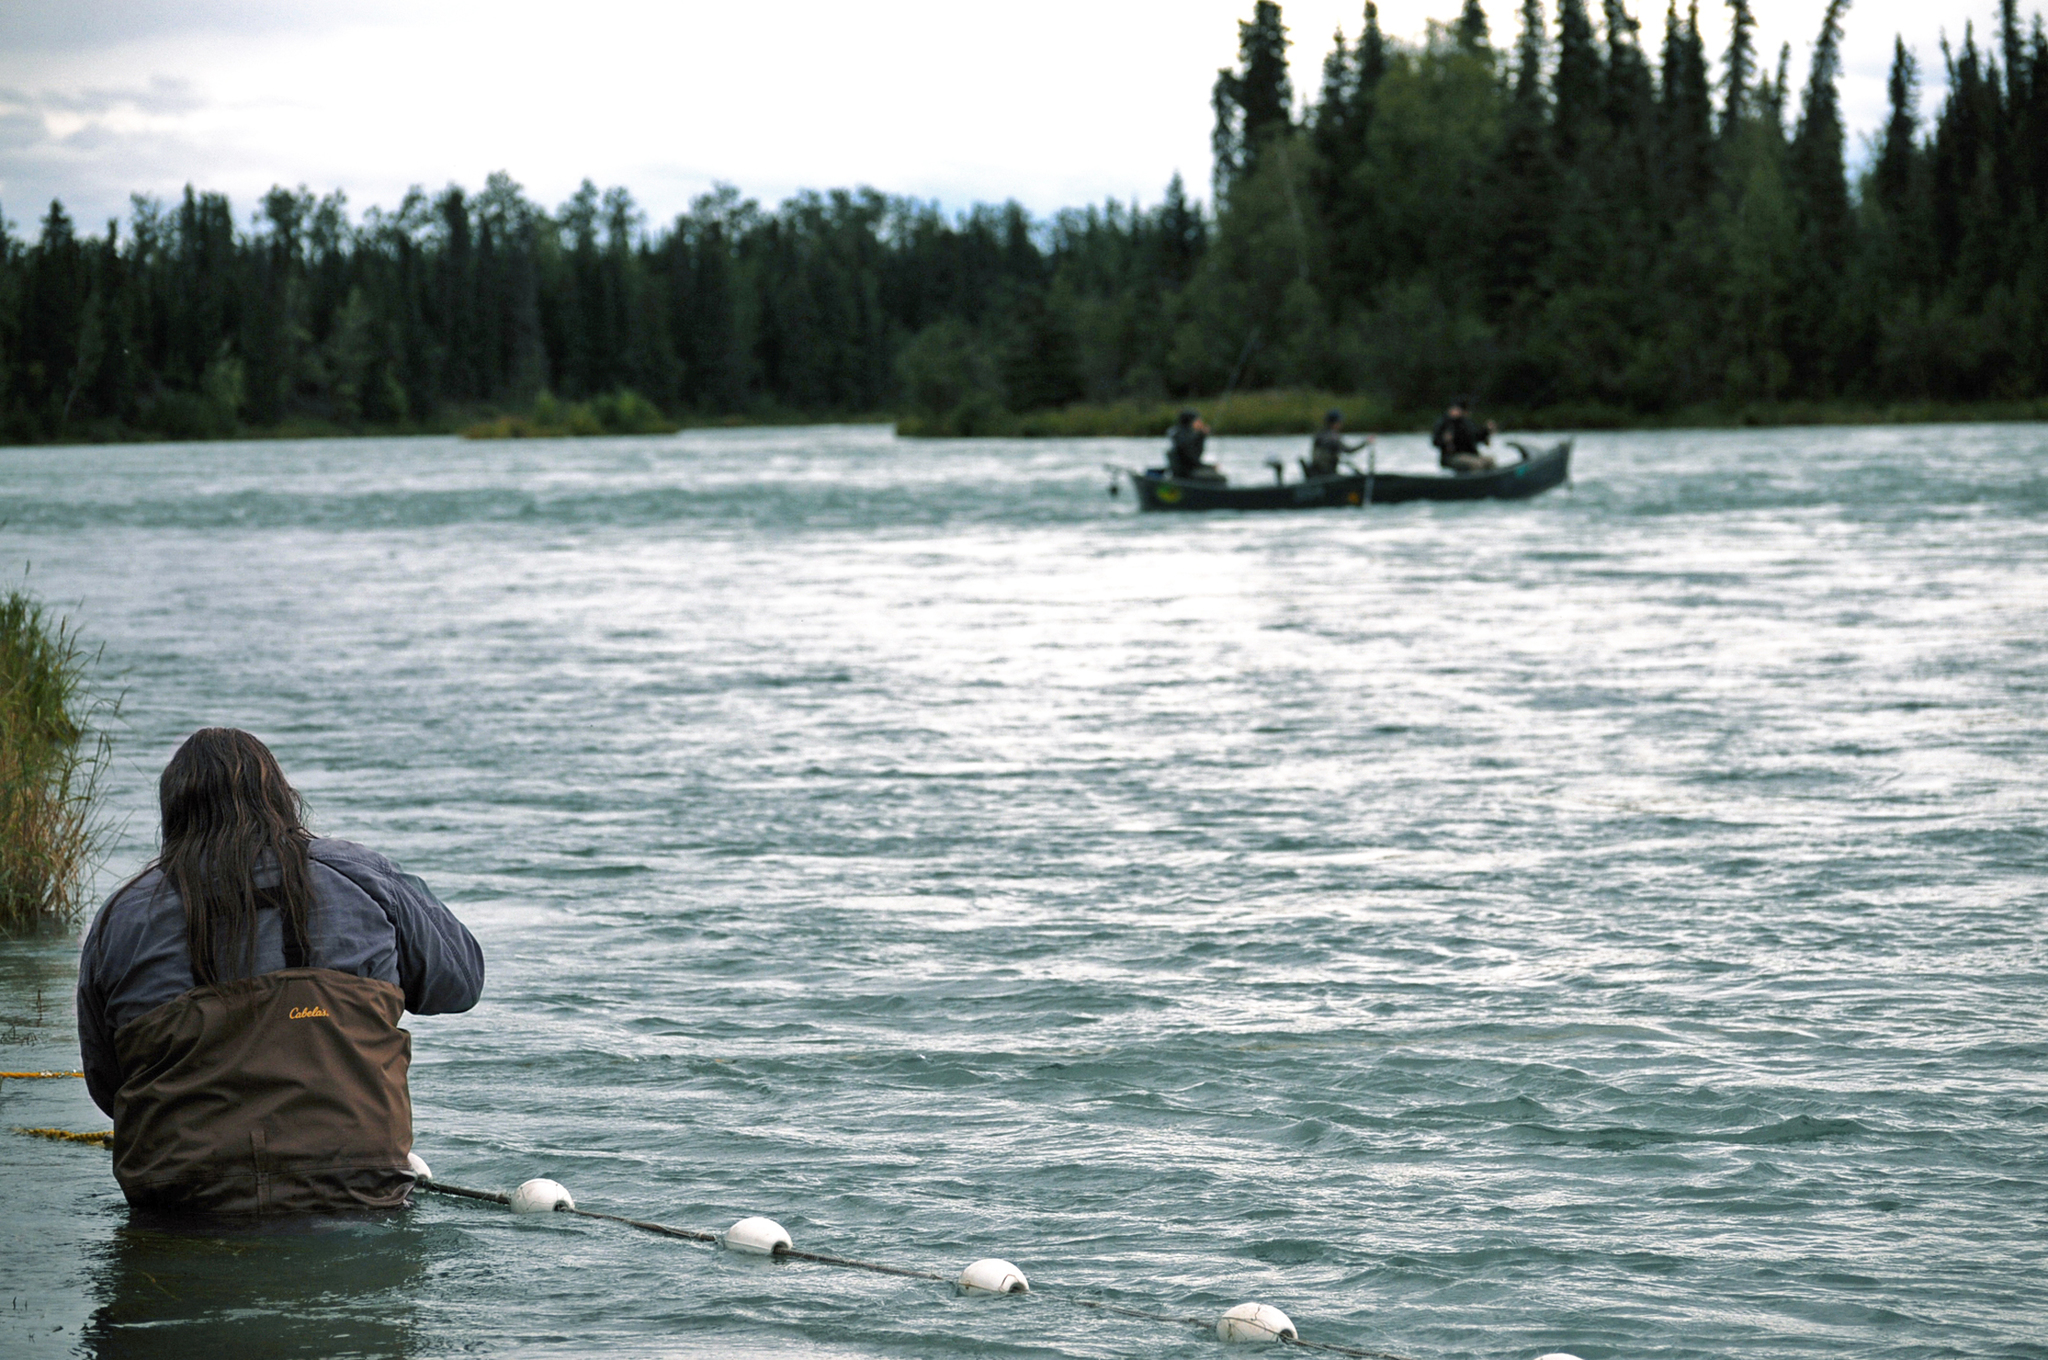 Ninilchik Traditional Council Resource and Environmental Director Darrel Williams checks the tribe’s subsistence gillnet for fish on the Kenai River on Sunday, Aug. 14, 2016 near Soldotna, Alaska. The tribe gained approval for the controversial net on July 27 and was able to fish it until Aug. 15. (Photo by Elizabeth Earl/Peninsula Clarion, file)